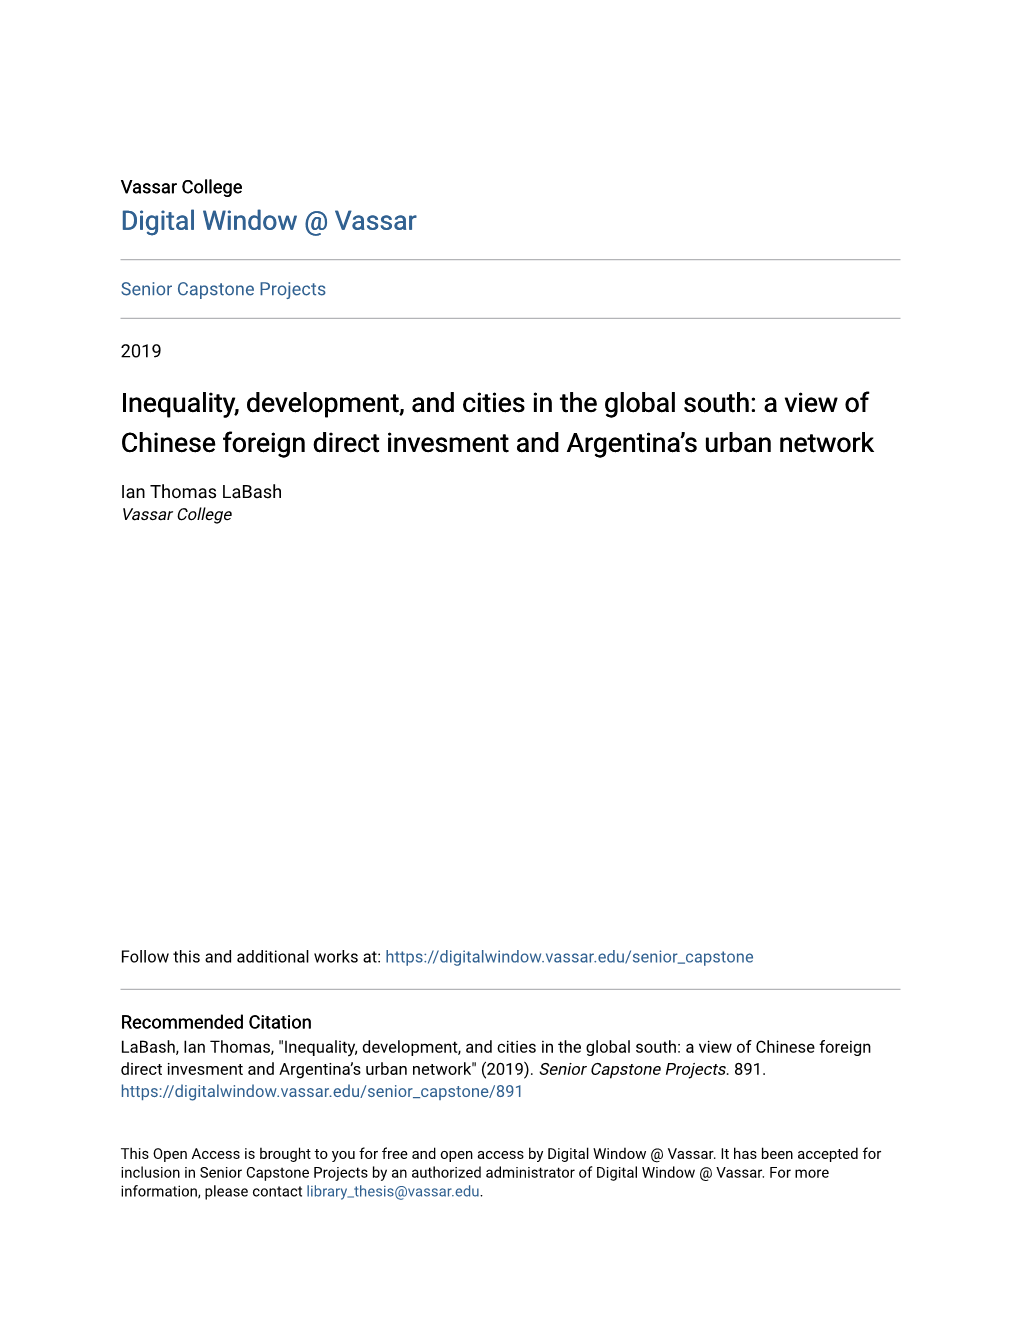 Inequality, Development, and Cities in the Global South: a View of Chinese Foreign Direct Invesment and Argentina’S Urban Network